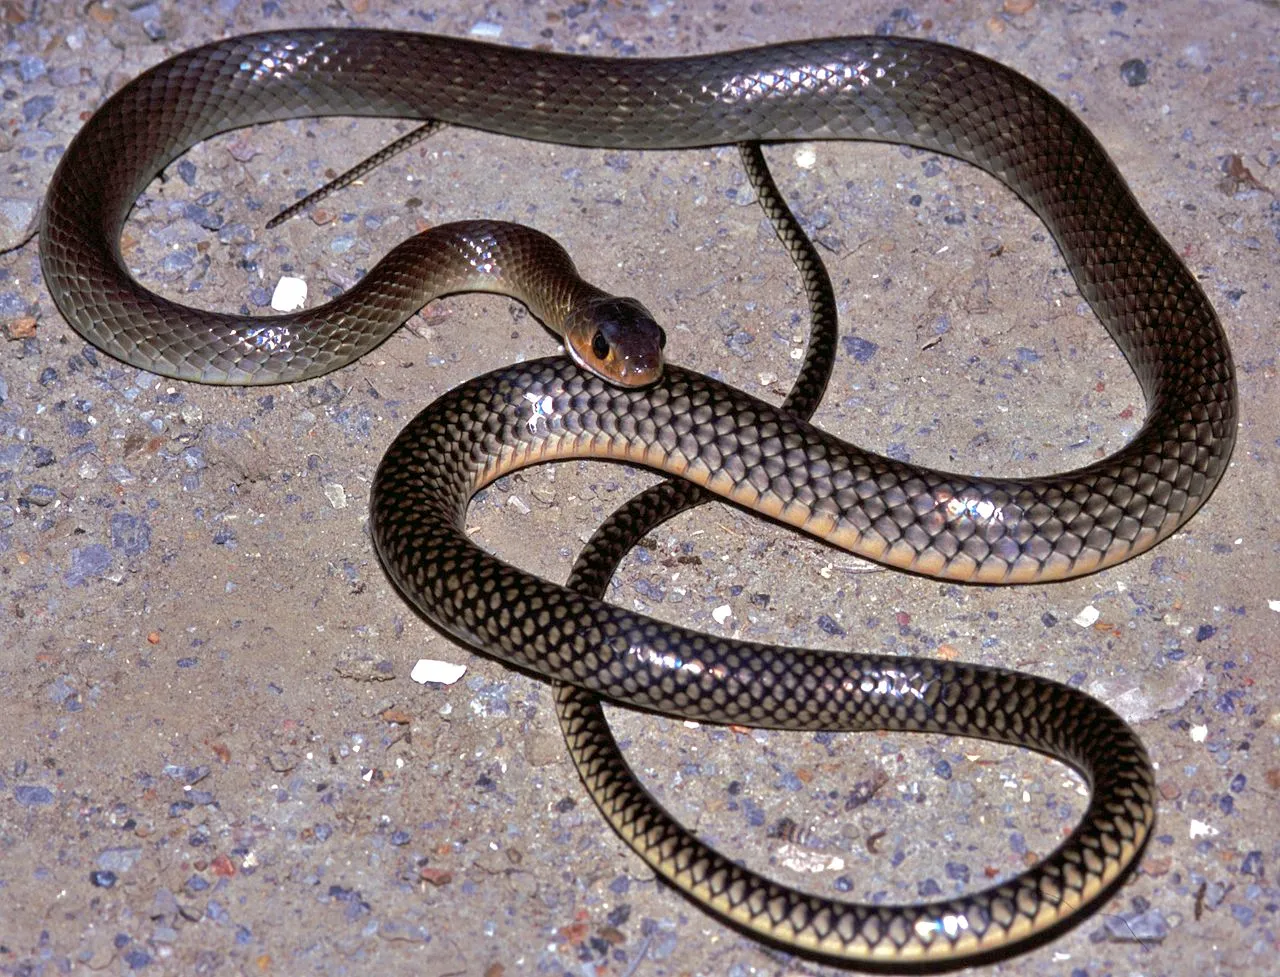 Chinese Rat Snake Facts